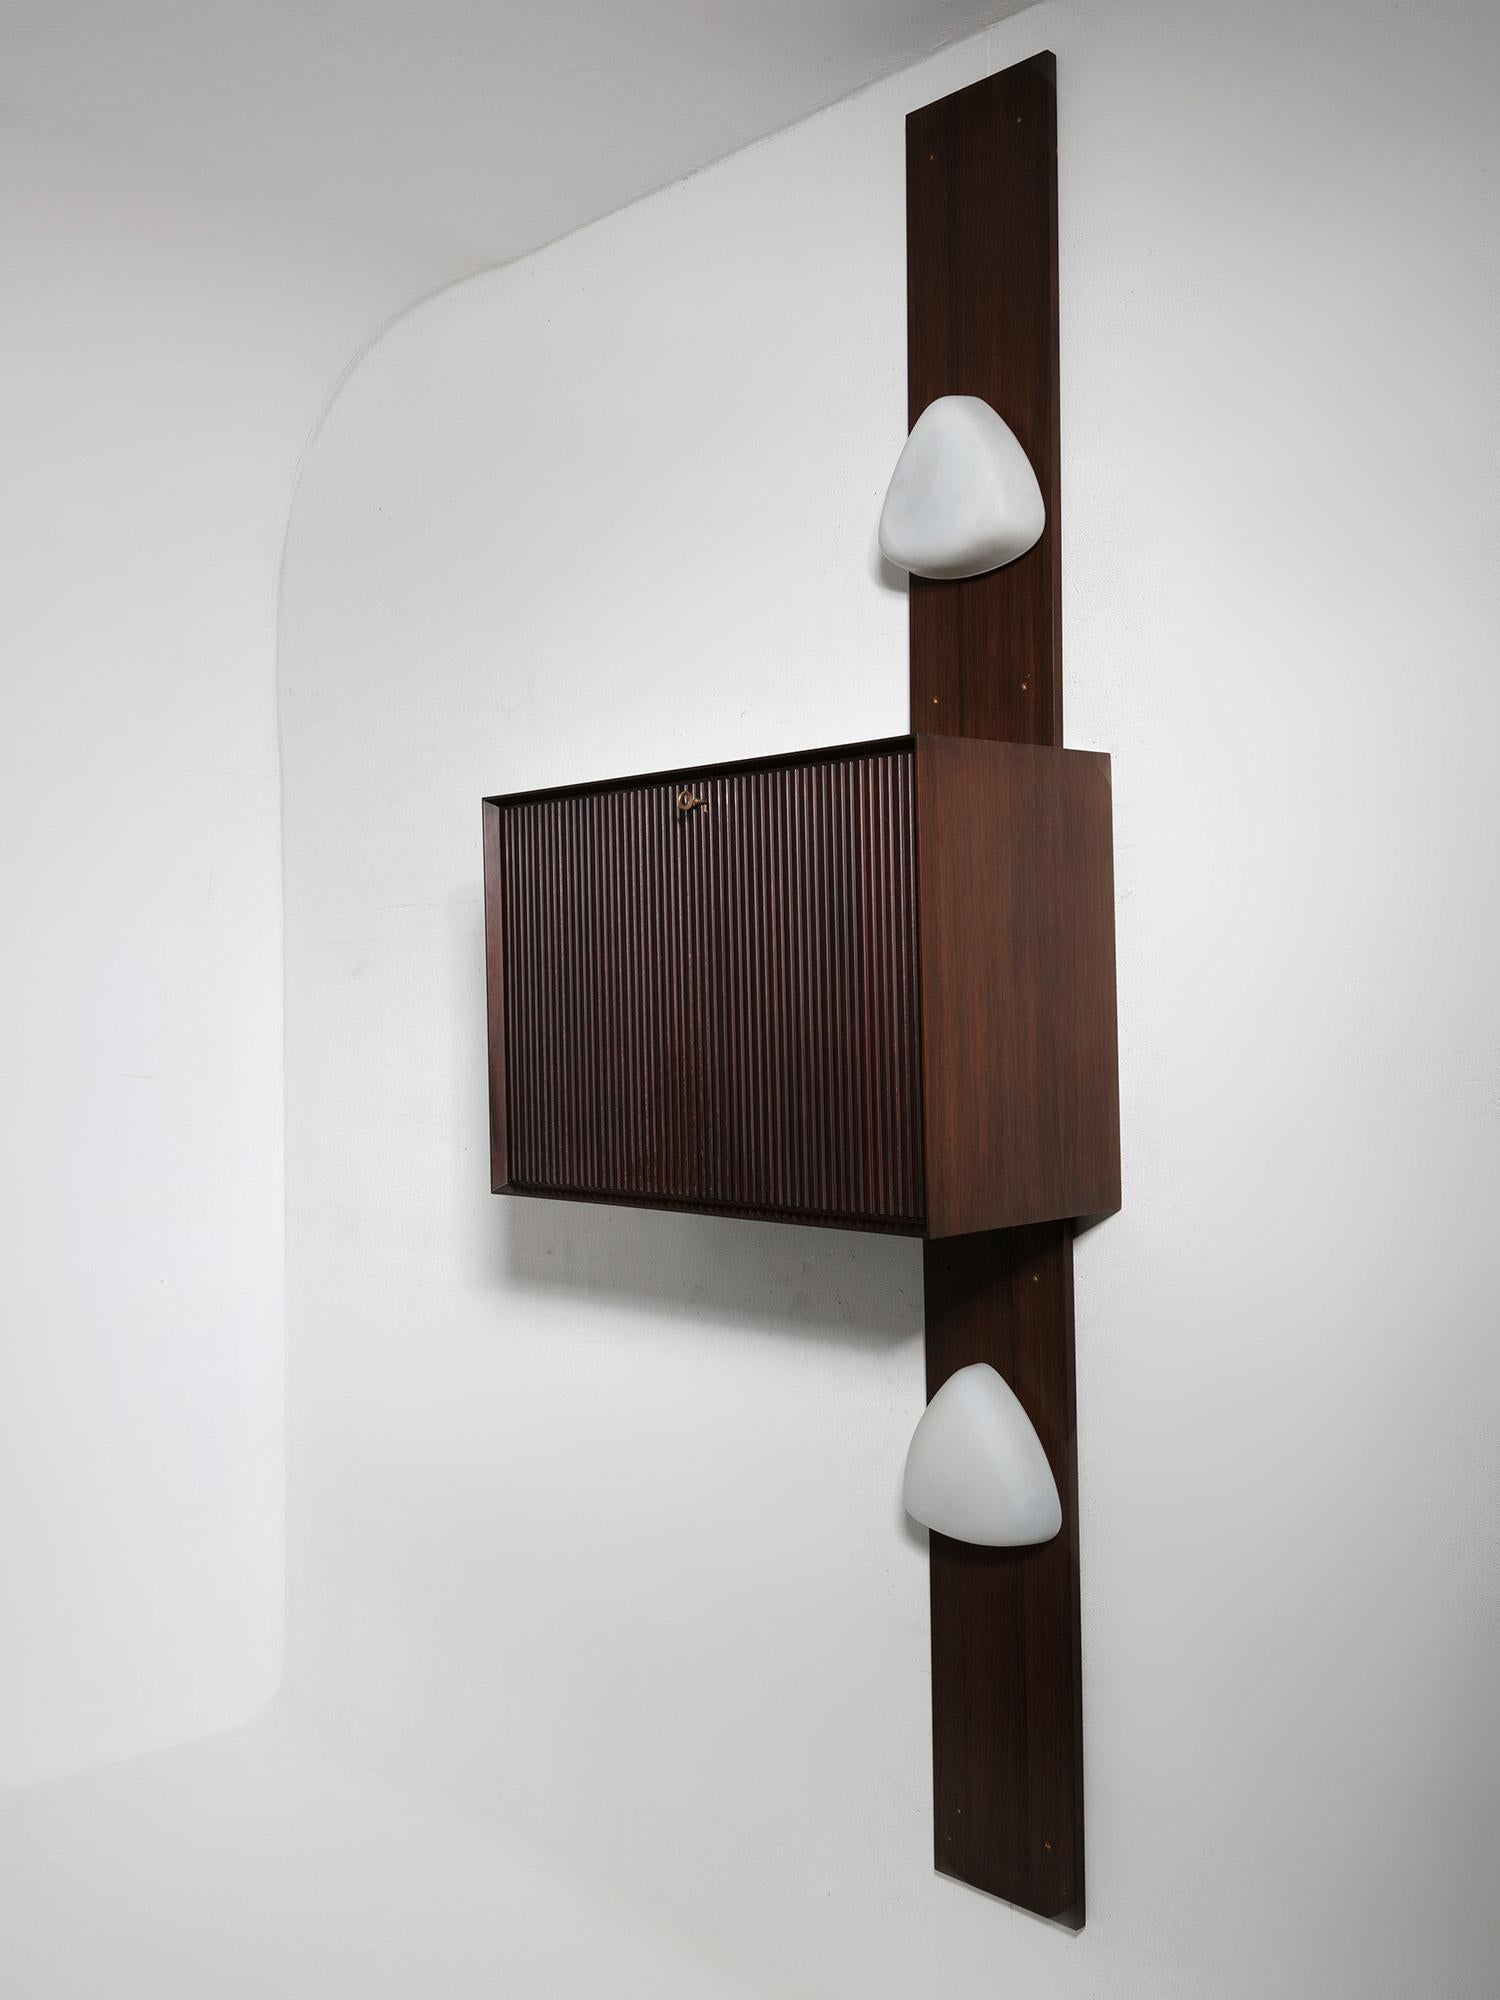 Wall-mounted dry bar.
Central unit feature a flap door and mirrored inside with glass shelves.
Main piece is surrounded by two vertical wood panels with opaline glass sconces.